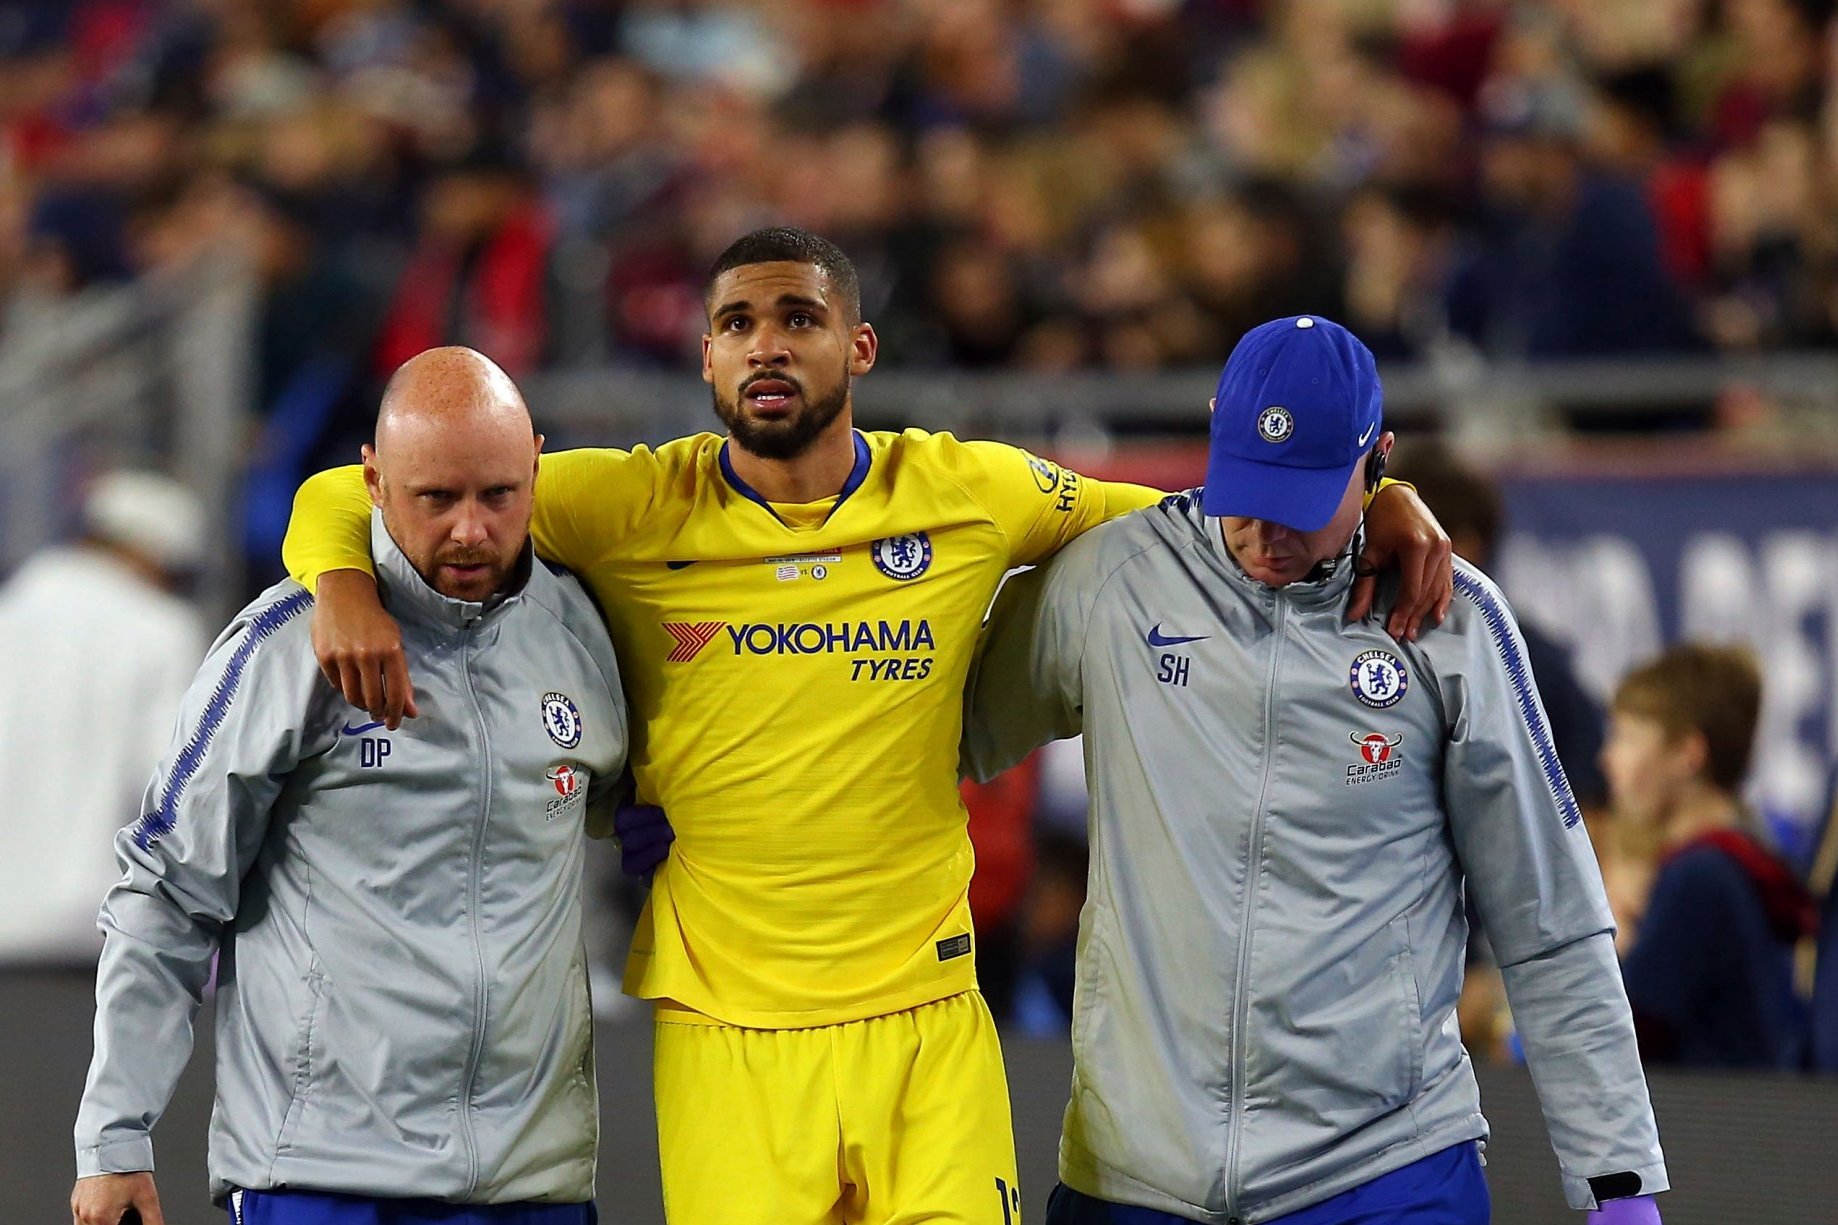 It's been one year since Ruben Loftus-Cheek played for the first Chelsea team